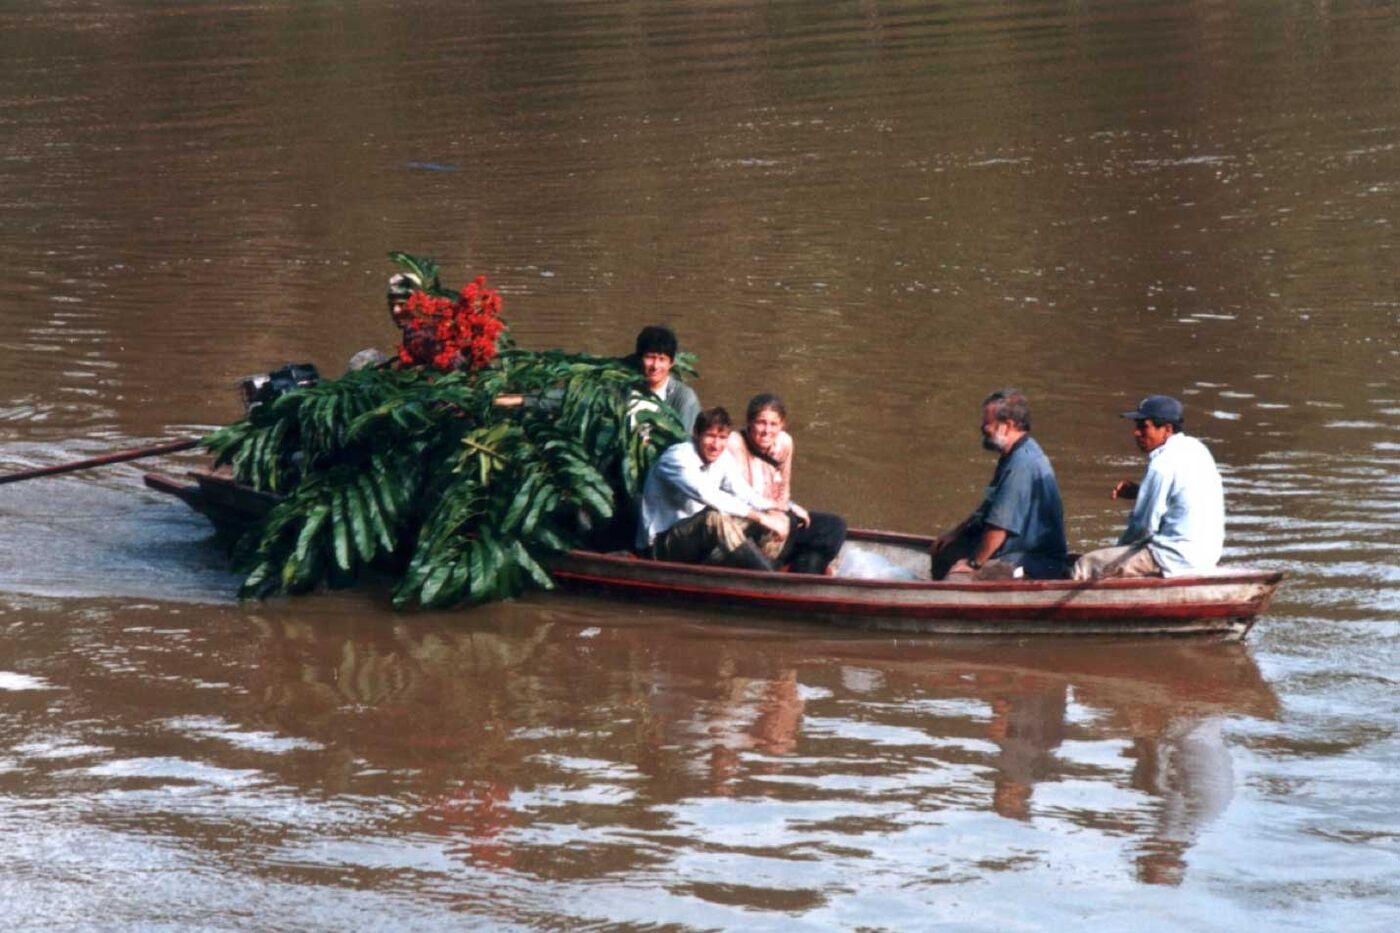 A group of people transporting plant specimens in a canoe on the river.